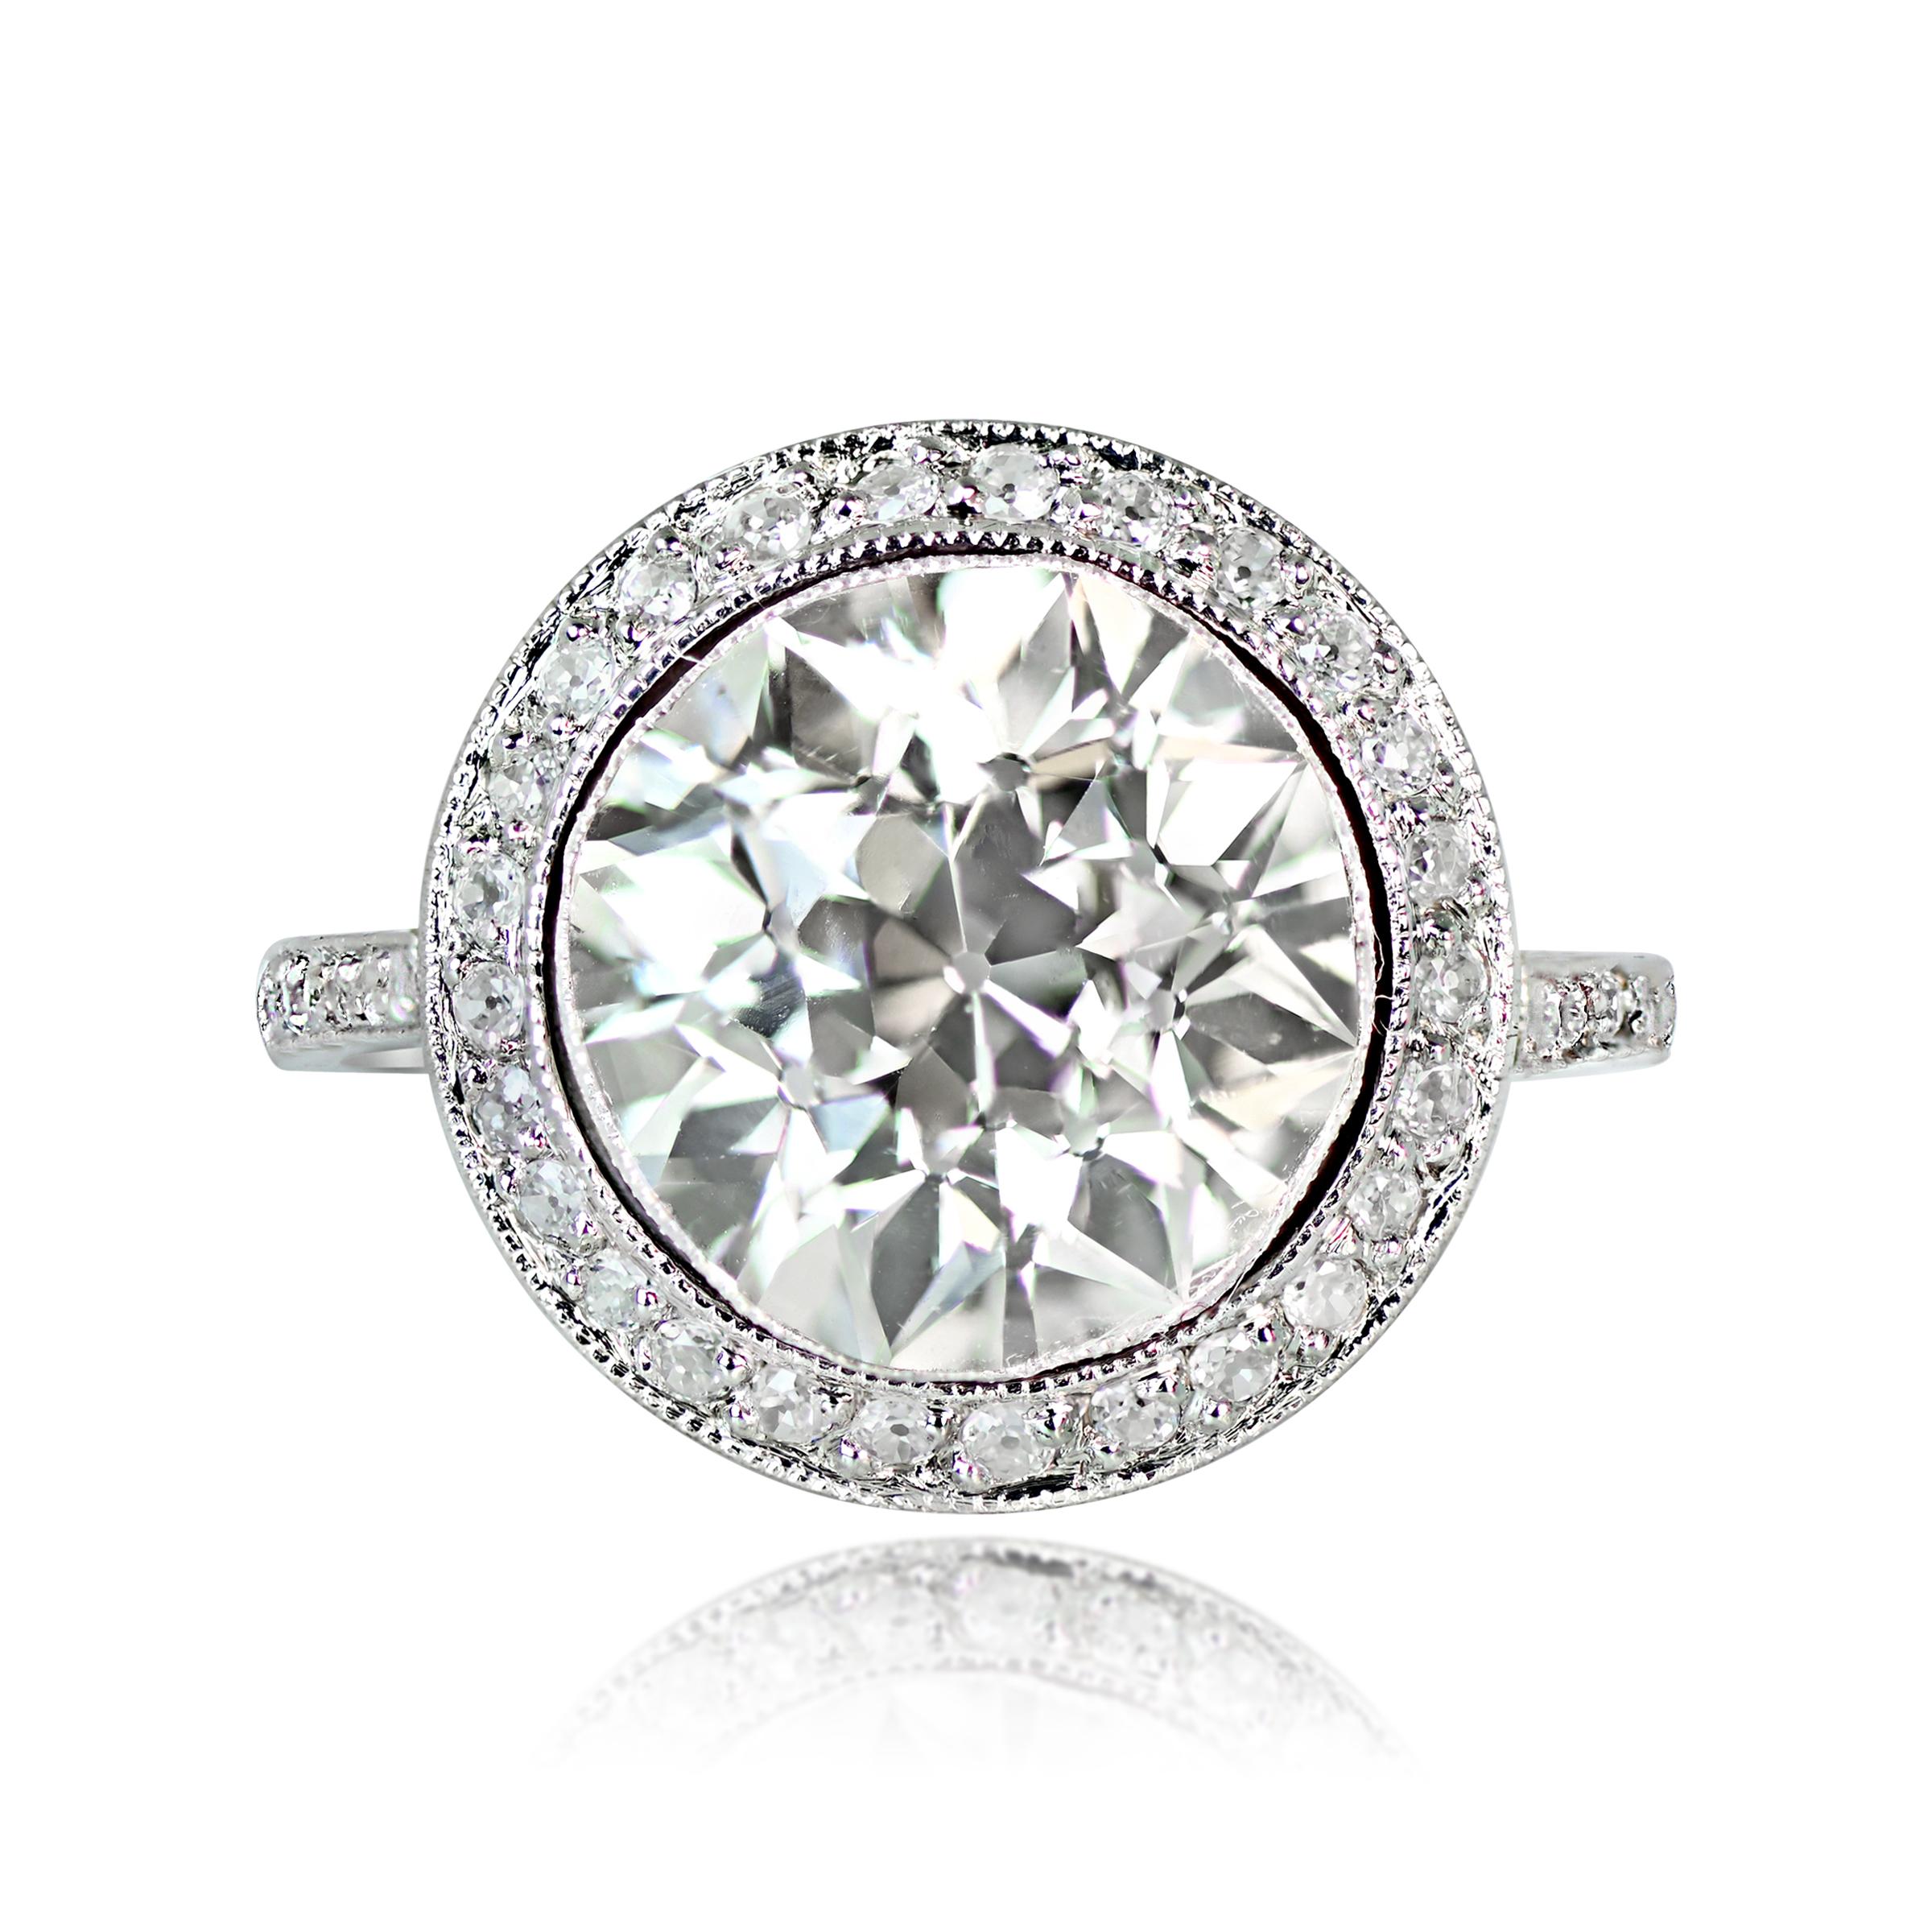 This is a stunning engagement ring features a remarkable 4.37 carat old European cut diamond with a lively sparkle, showcased in a sleek bezel setting. The diamond's L color and VS2 clarity are complemented by a stunning halo of pave-set old